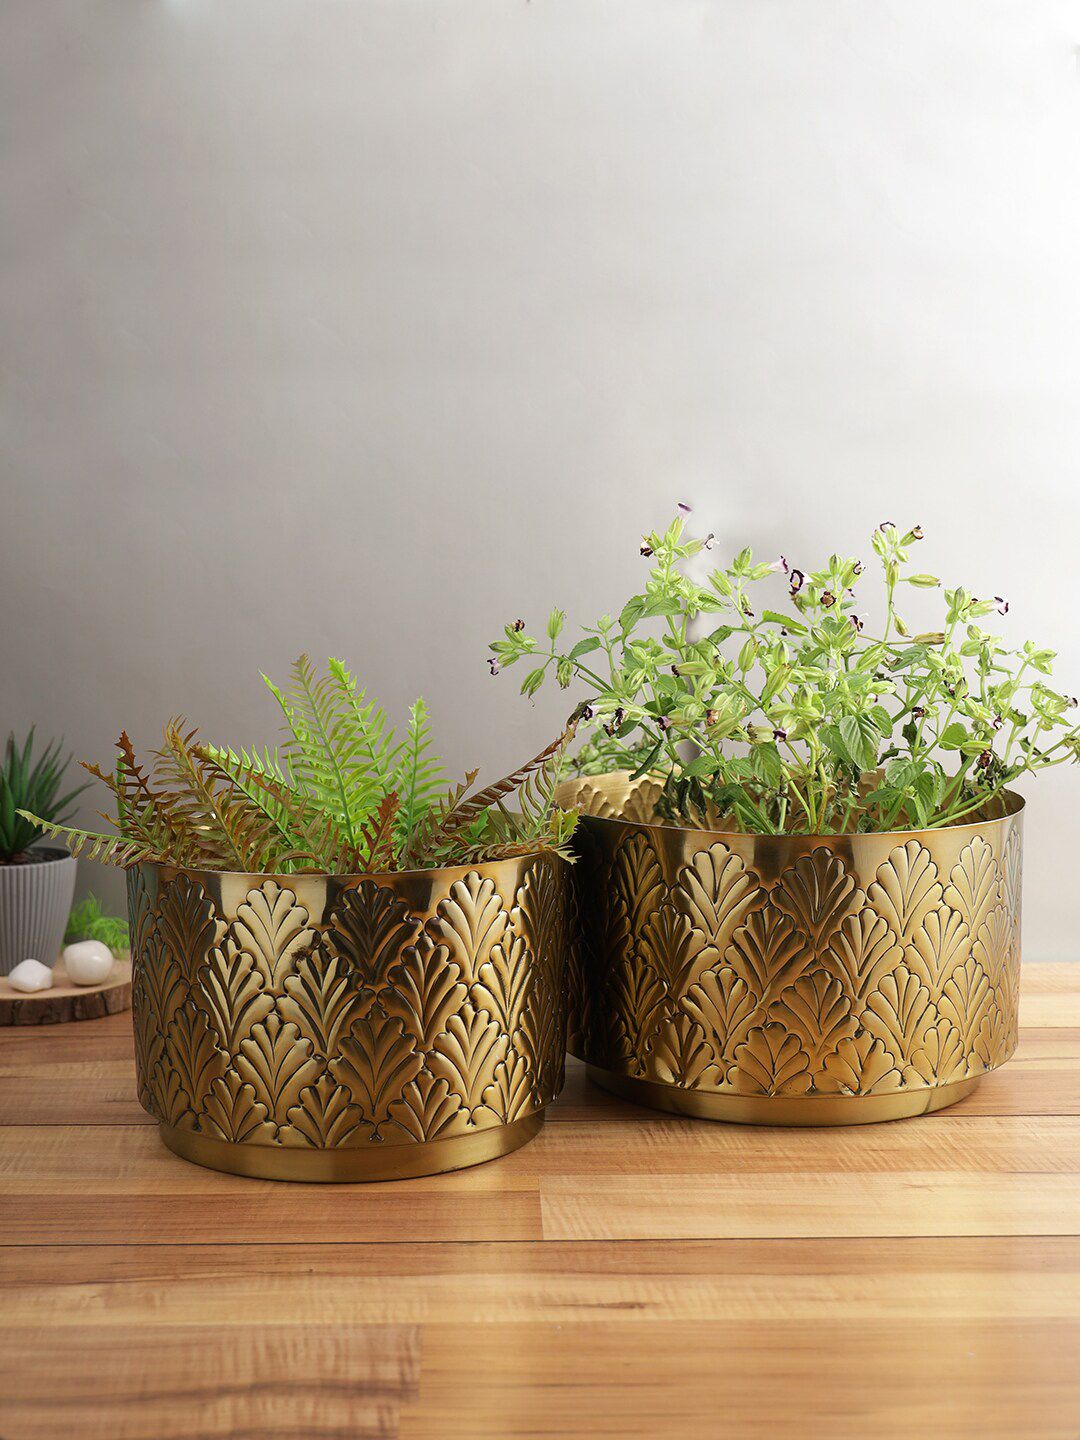 Aapno Rajasthan Set Of 2 Solid Planters Price in India